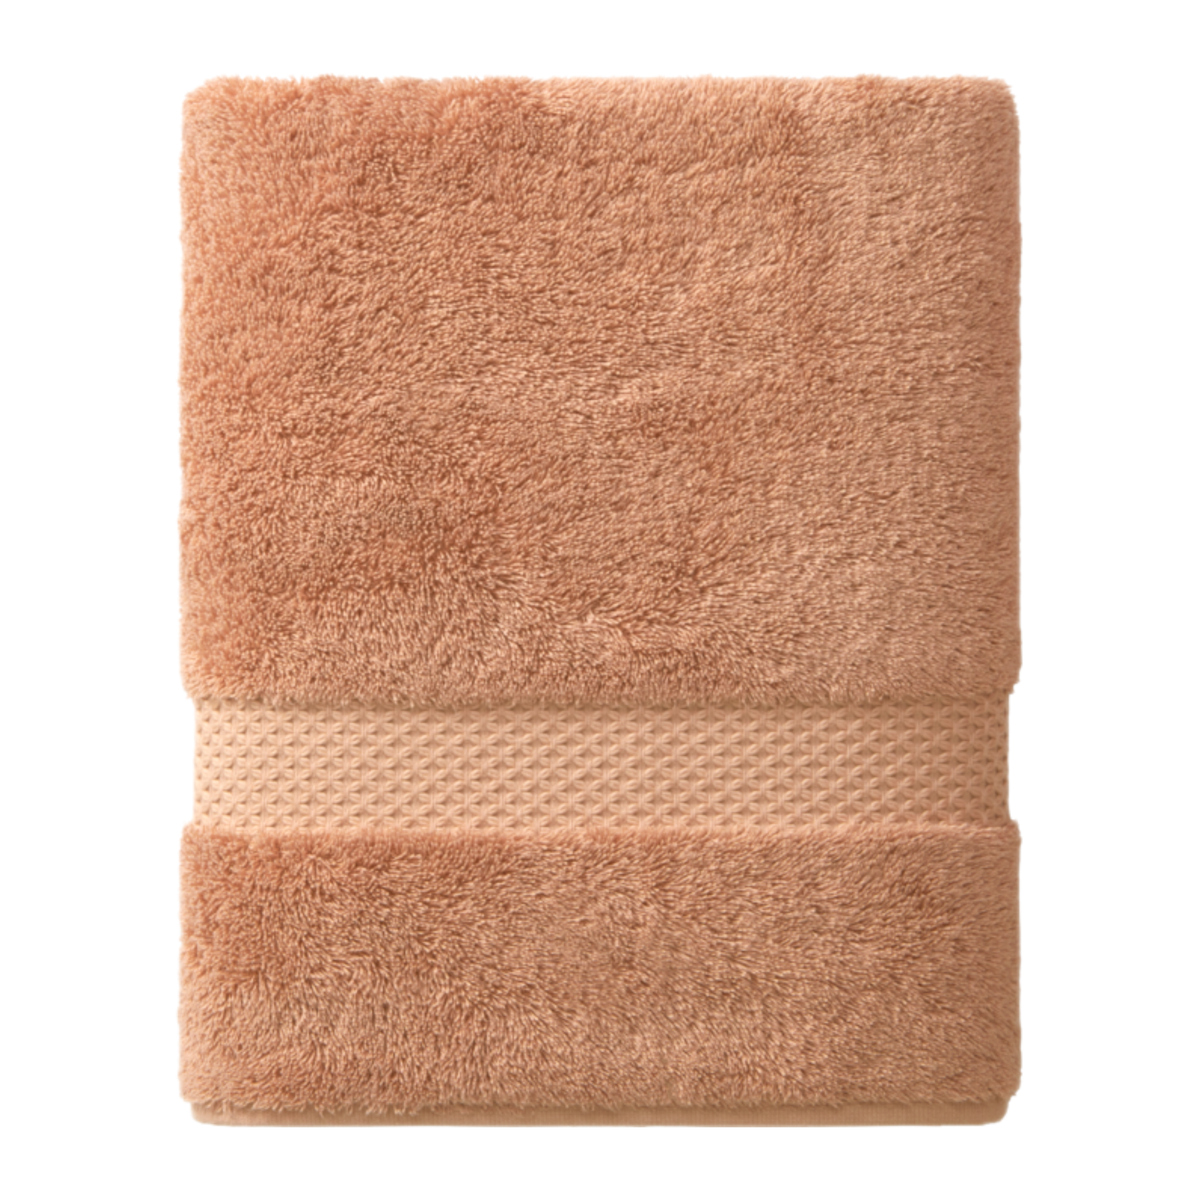 Folded Washcloth of Yves Delorme Etoile Bath Collection in Sienna Color